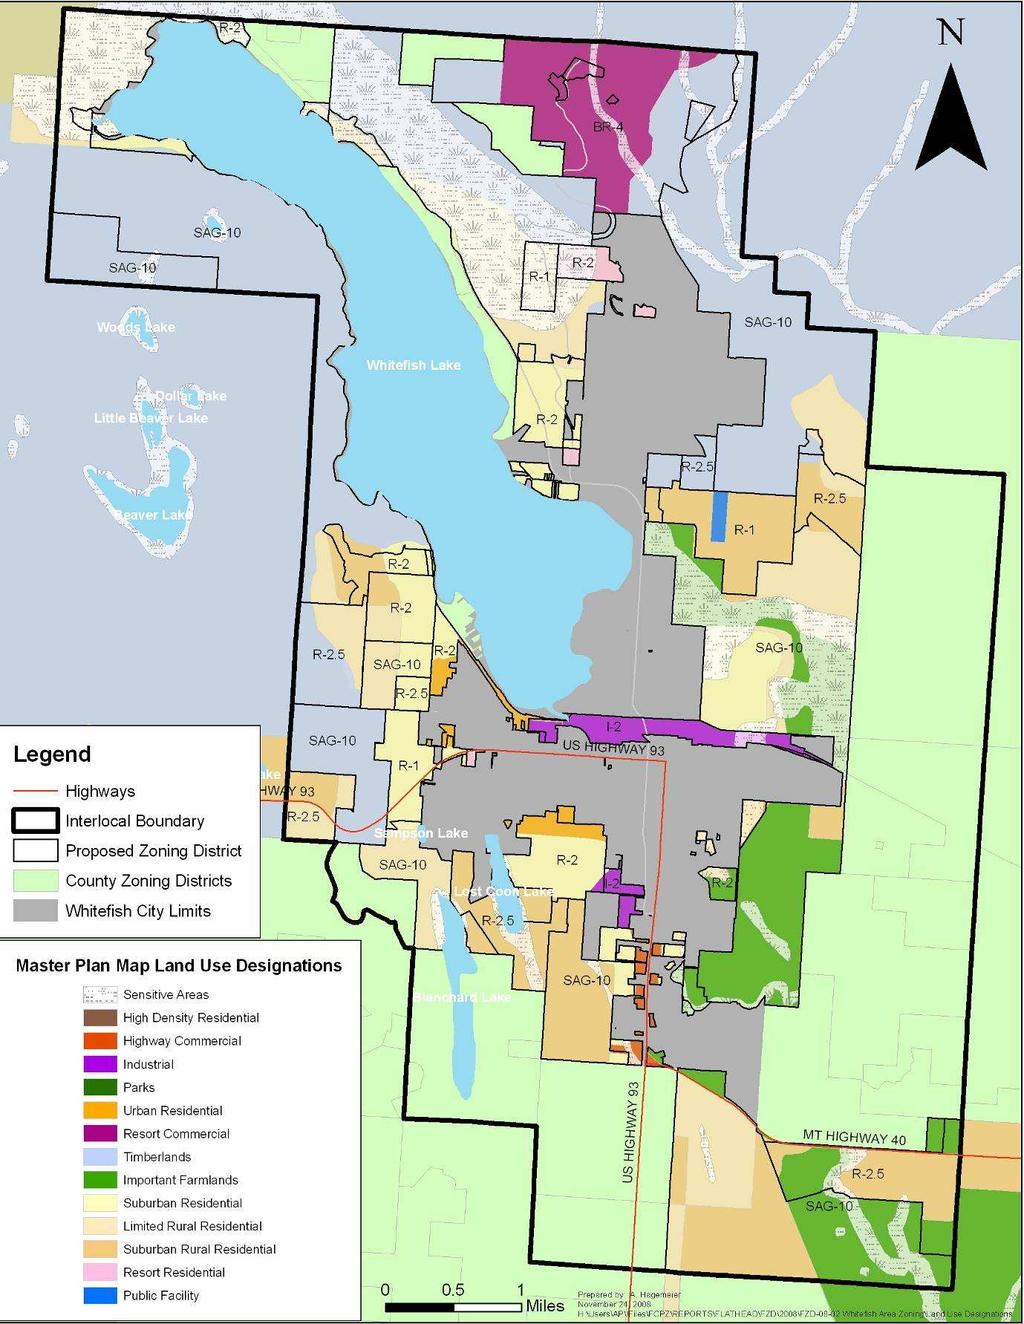 Figure 8: This map shows the proposed designations with the Master Plan land use designations underneath.